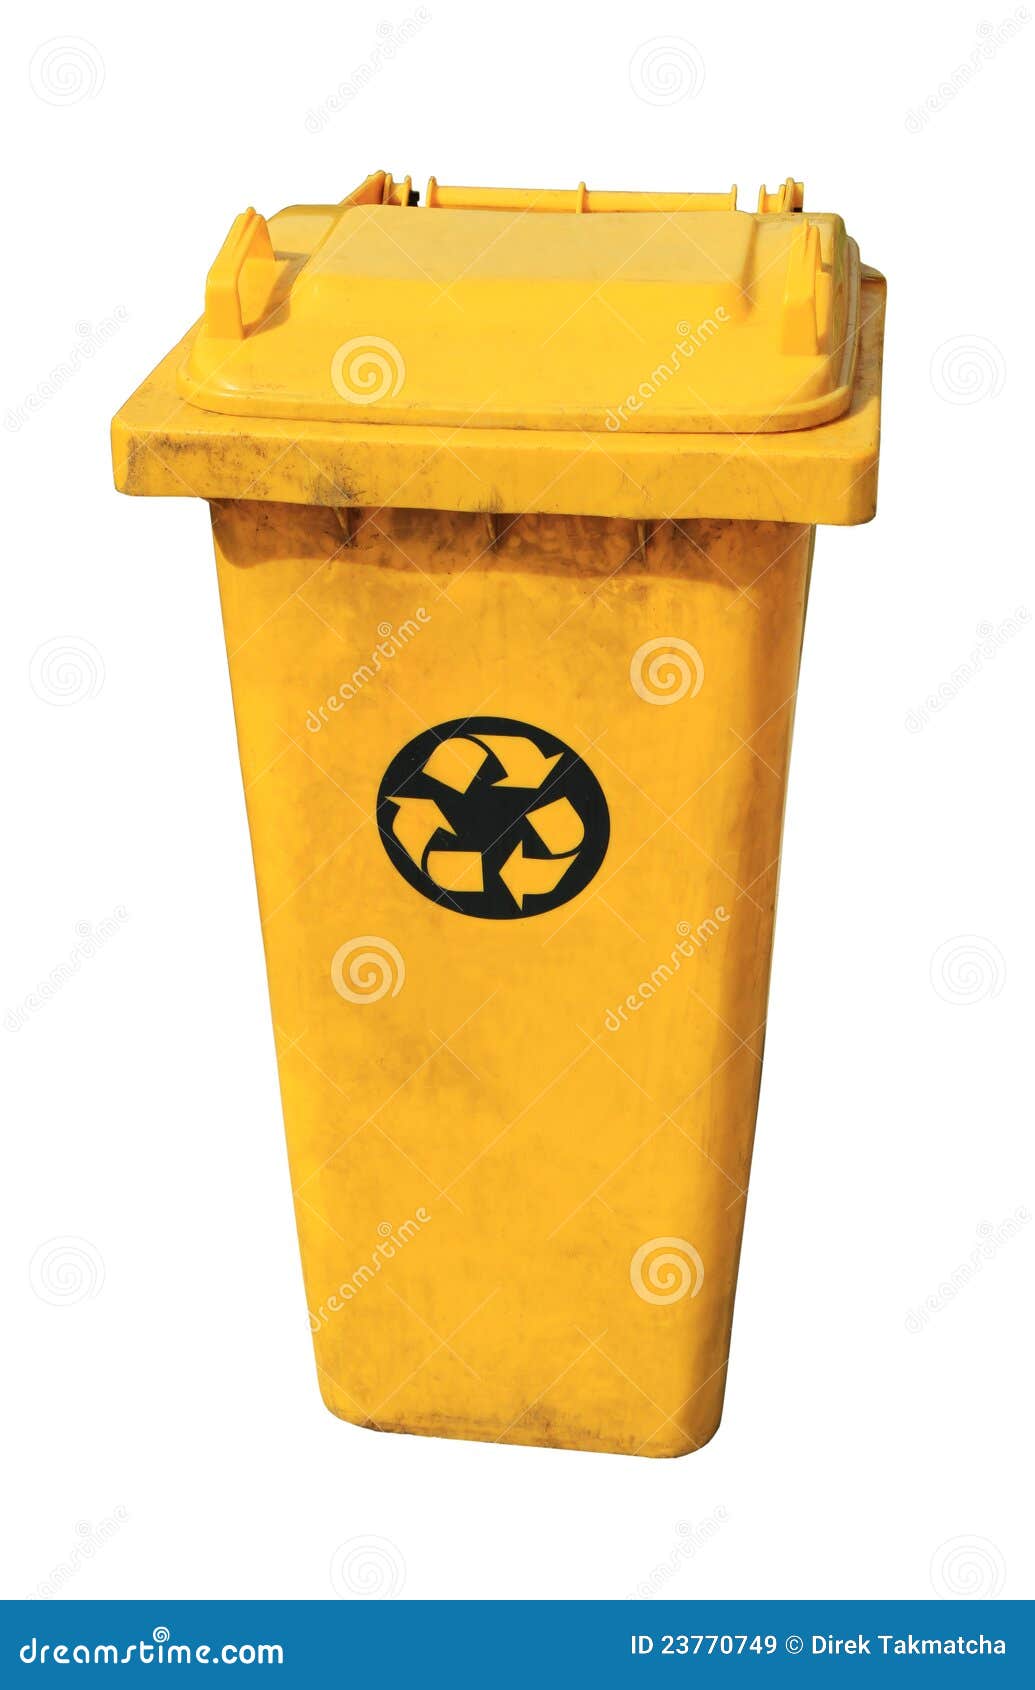 Yellow Recycle Bin Royalty Free Stock Images - Image: 23770749
